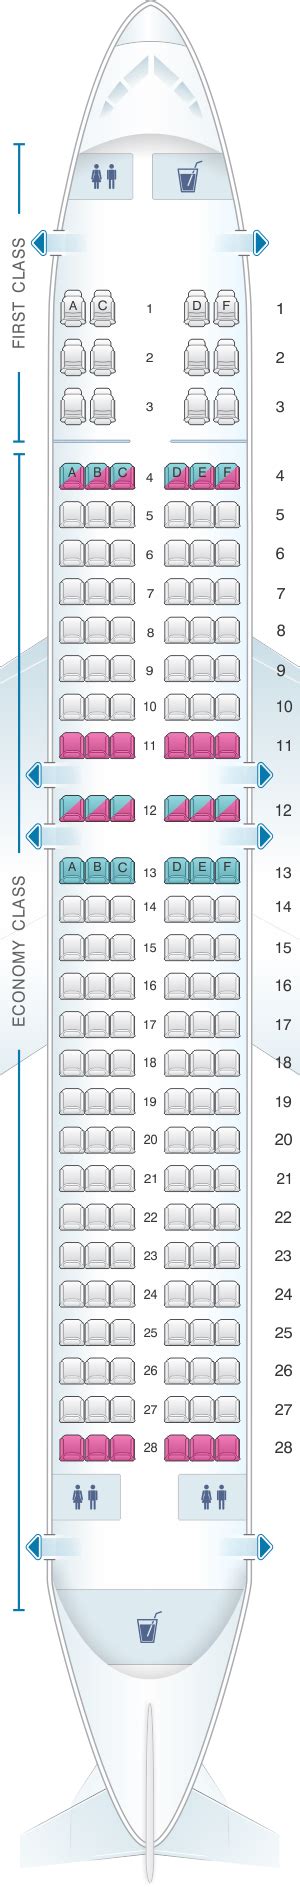 sun country 737 seat map